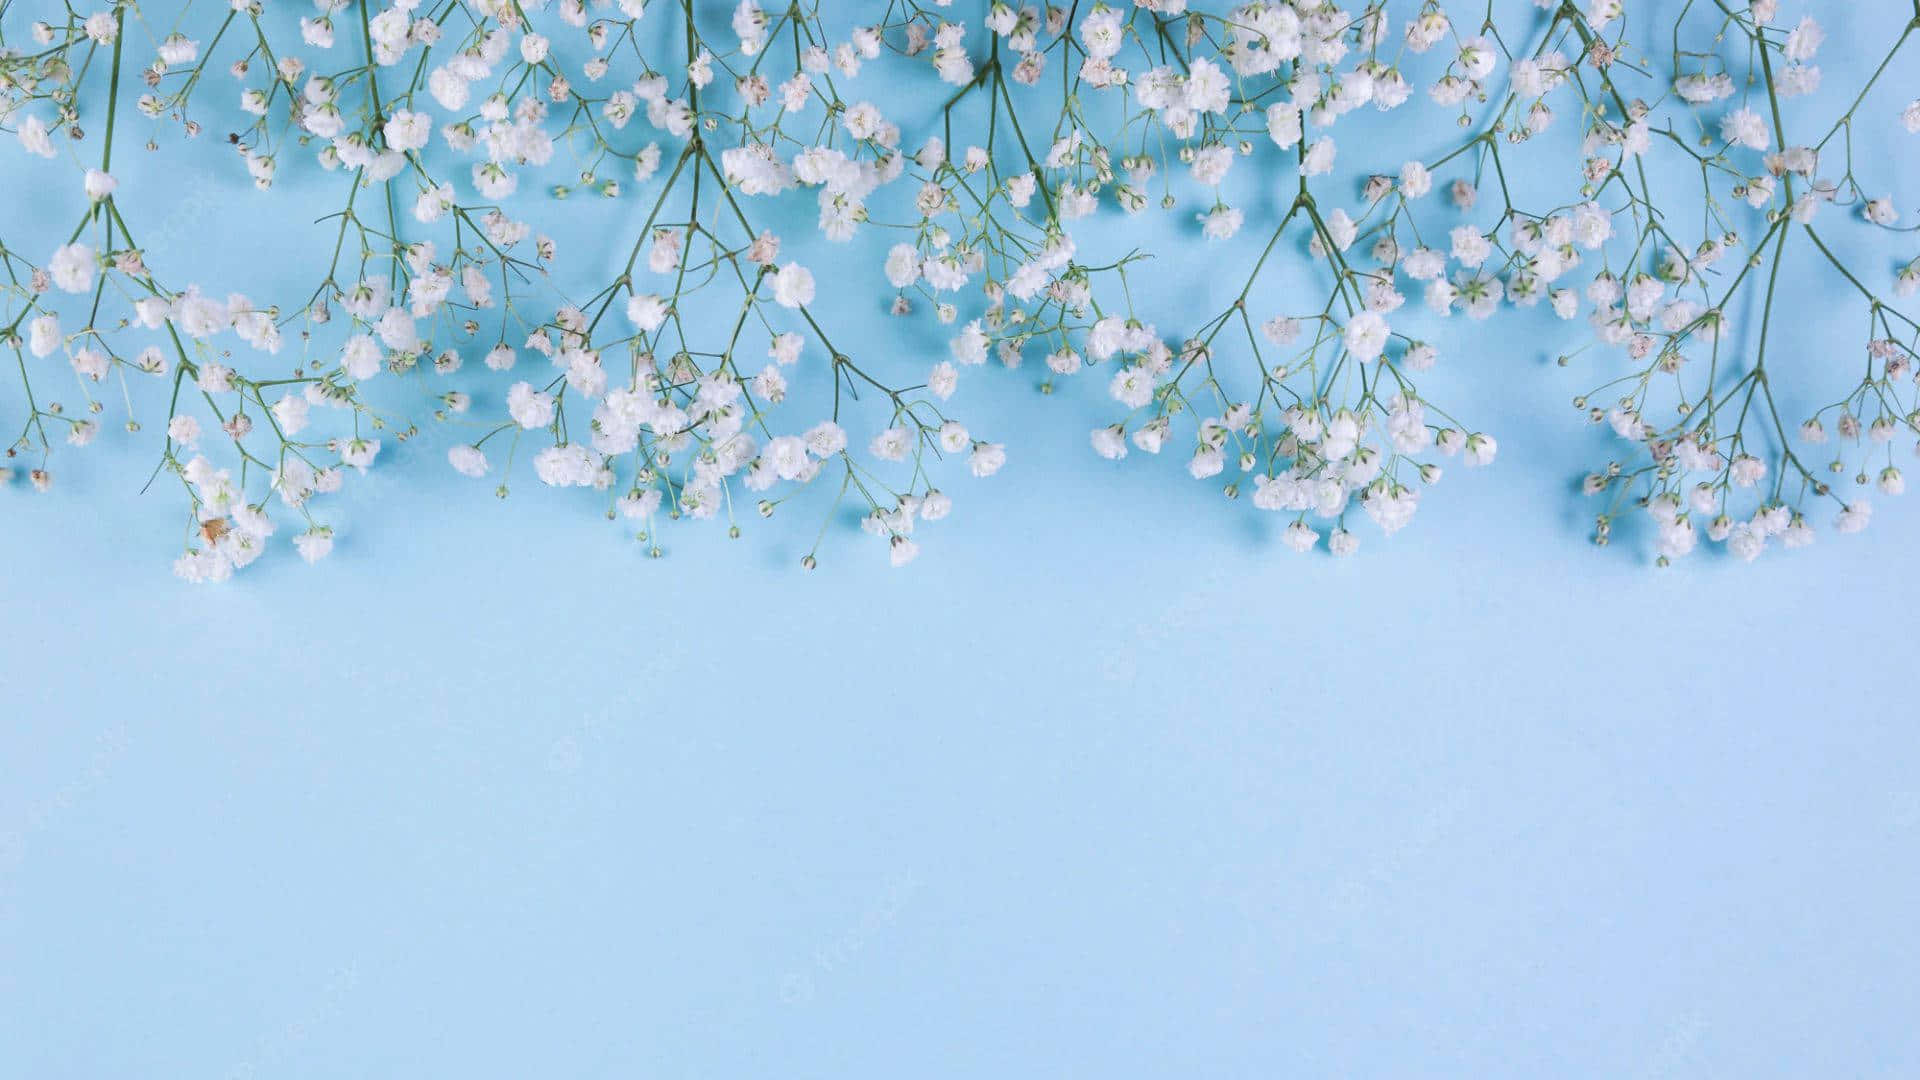 All You Need is the Simple Blue of Relaxation" Wallpaper